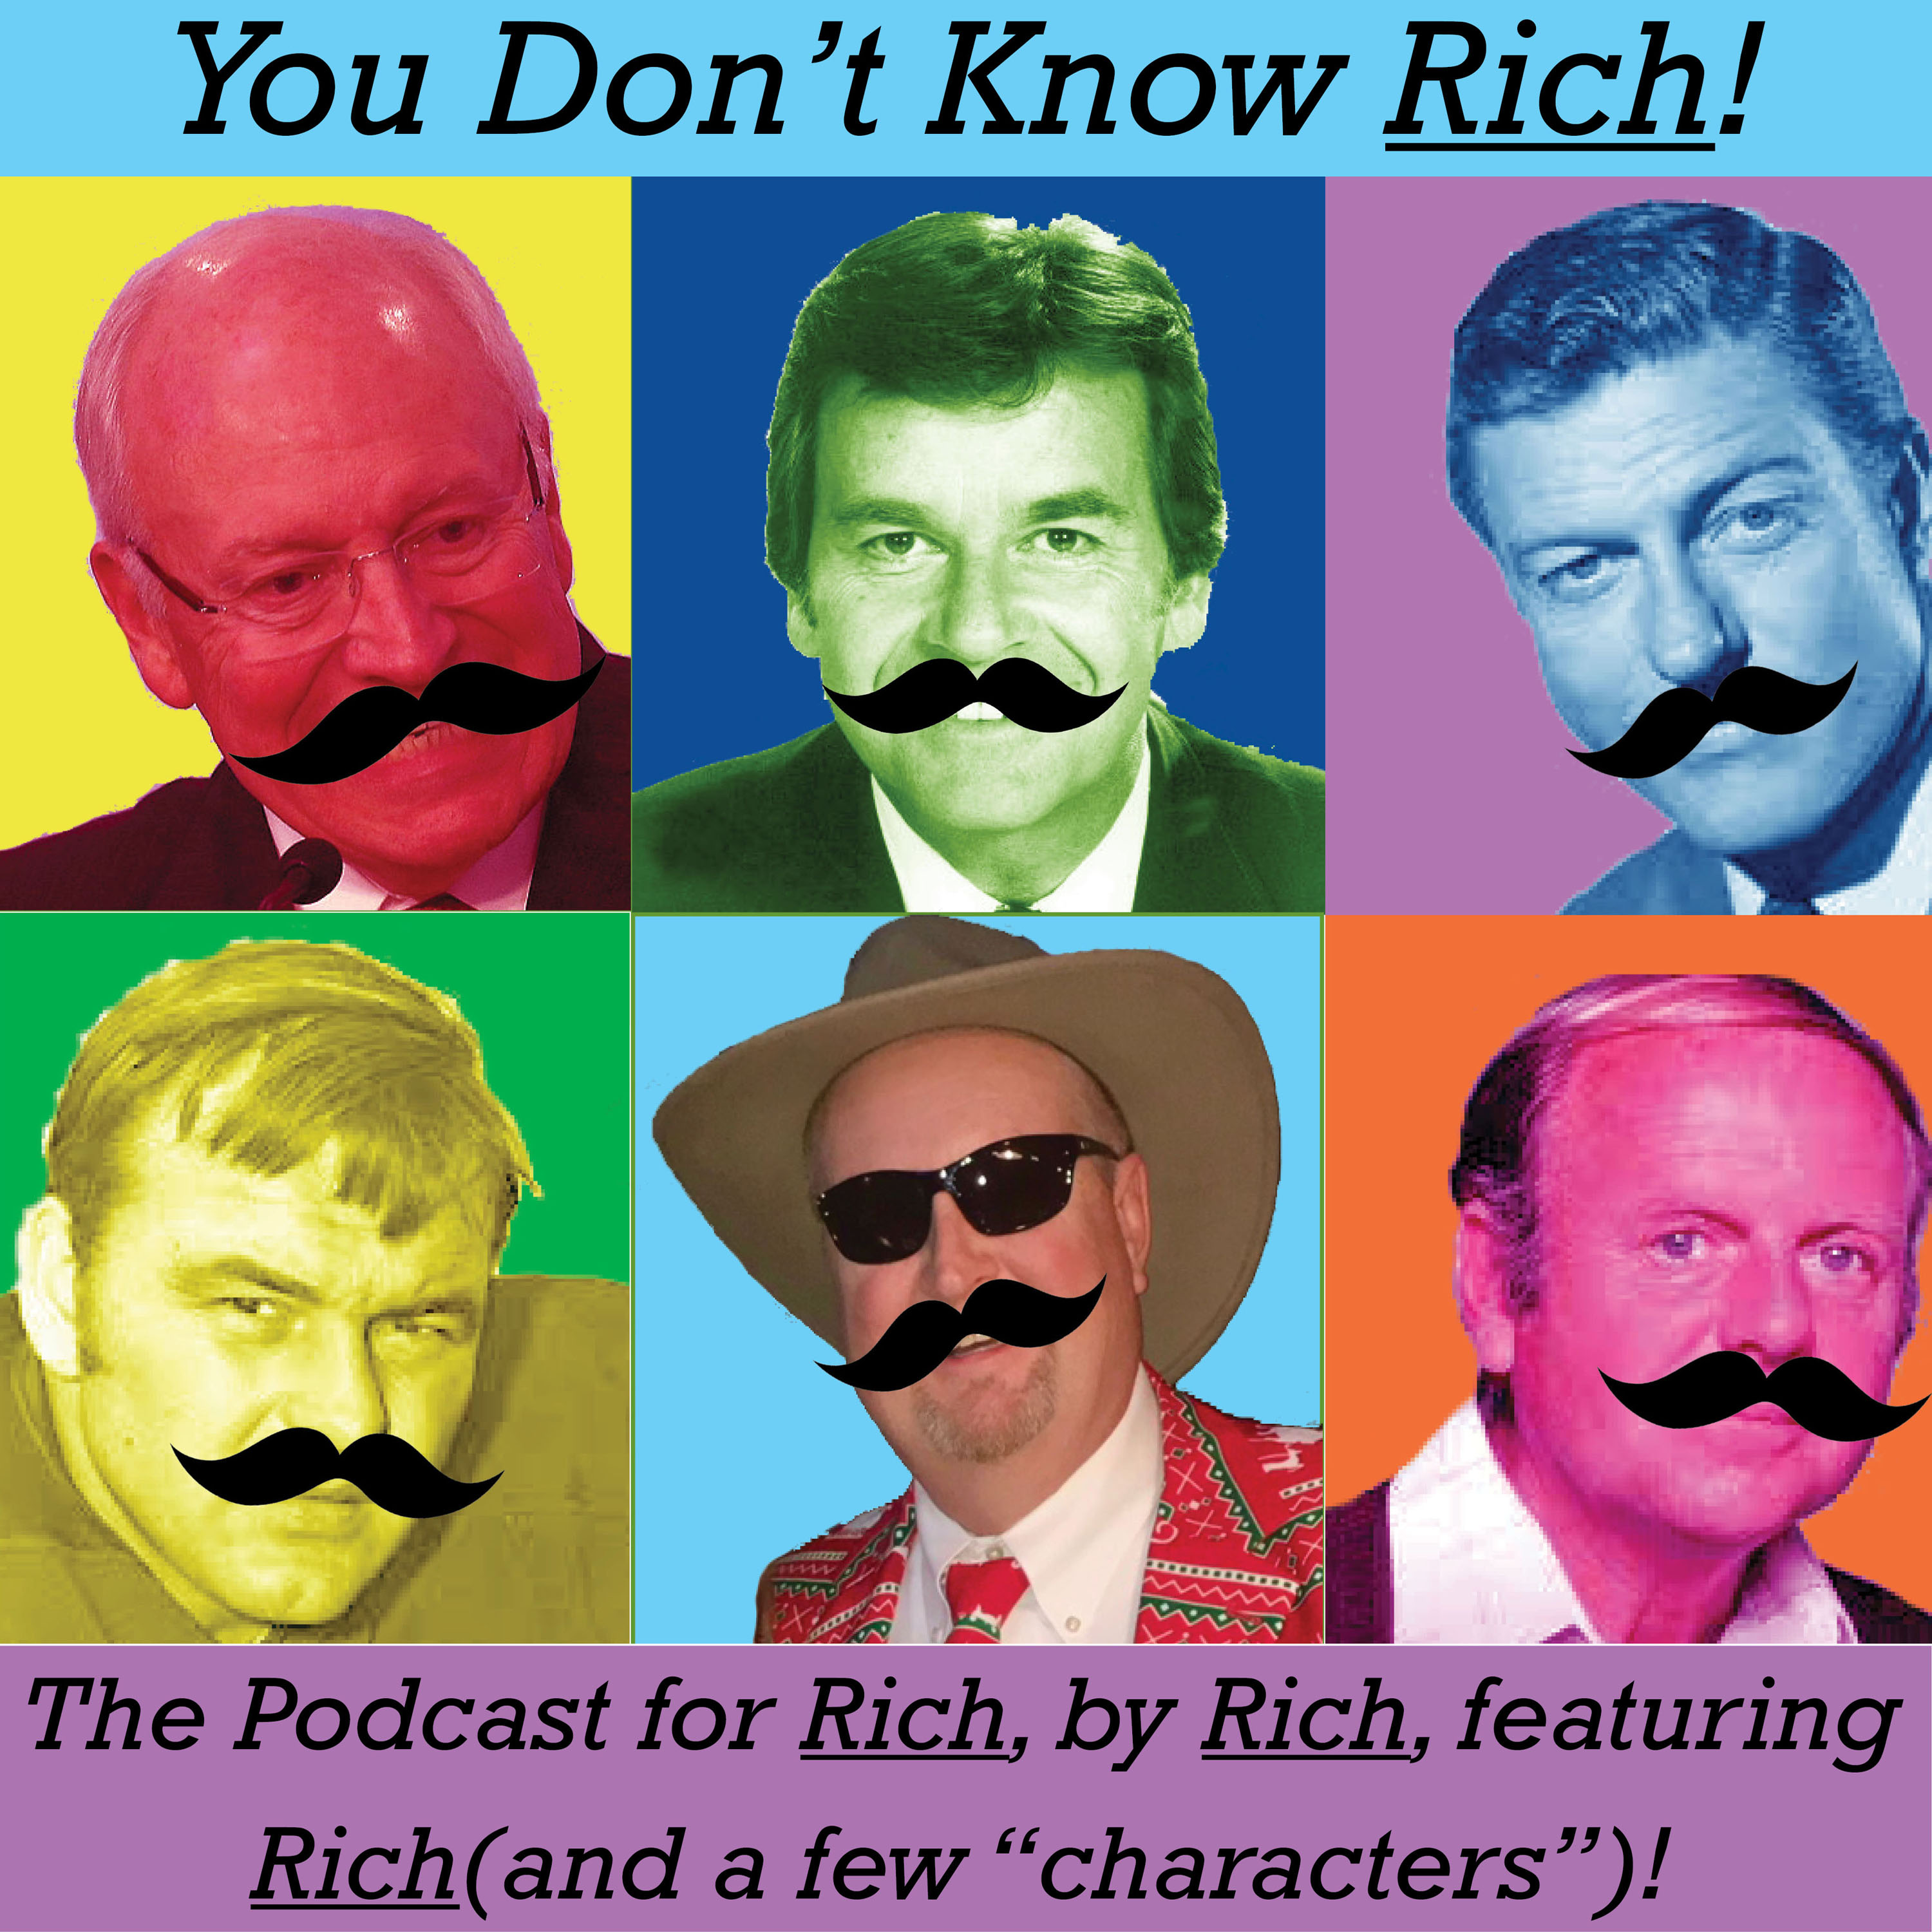 You Don't Know Rich!